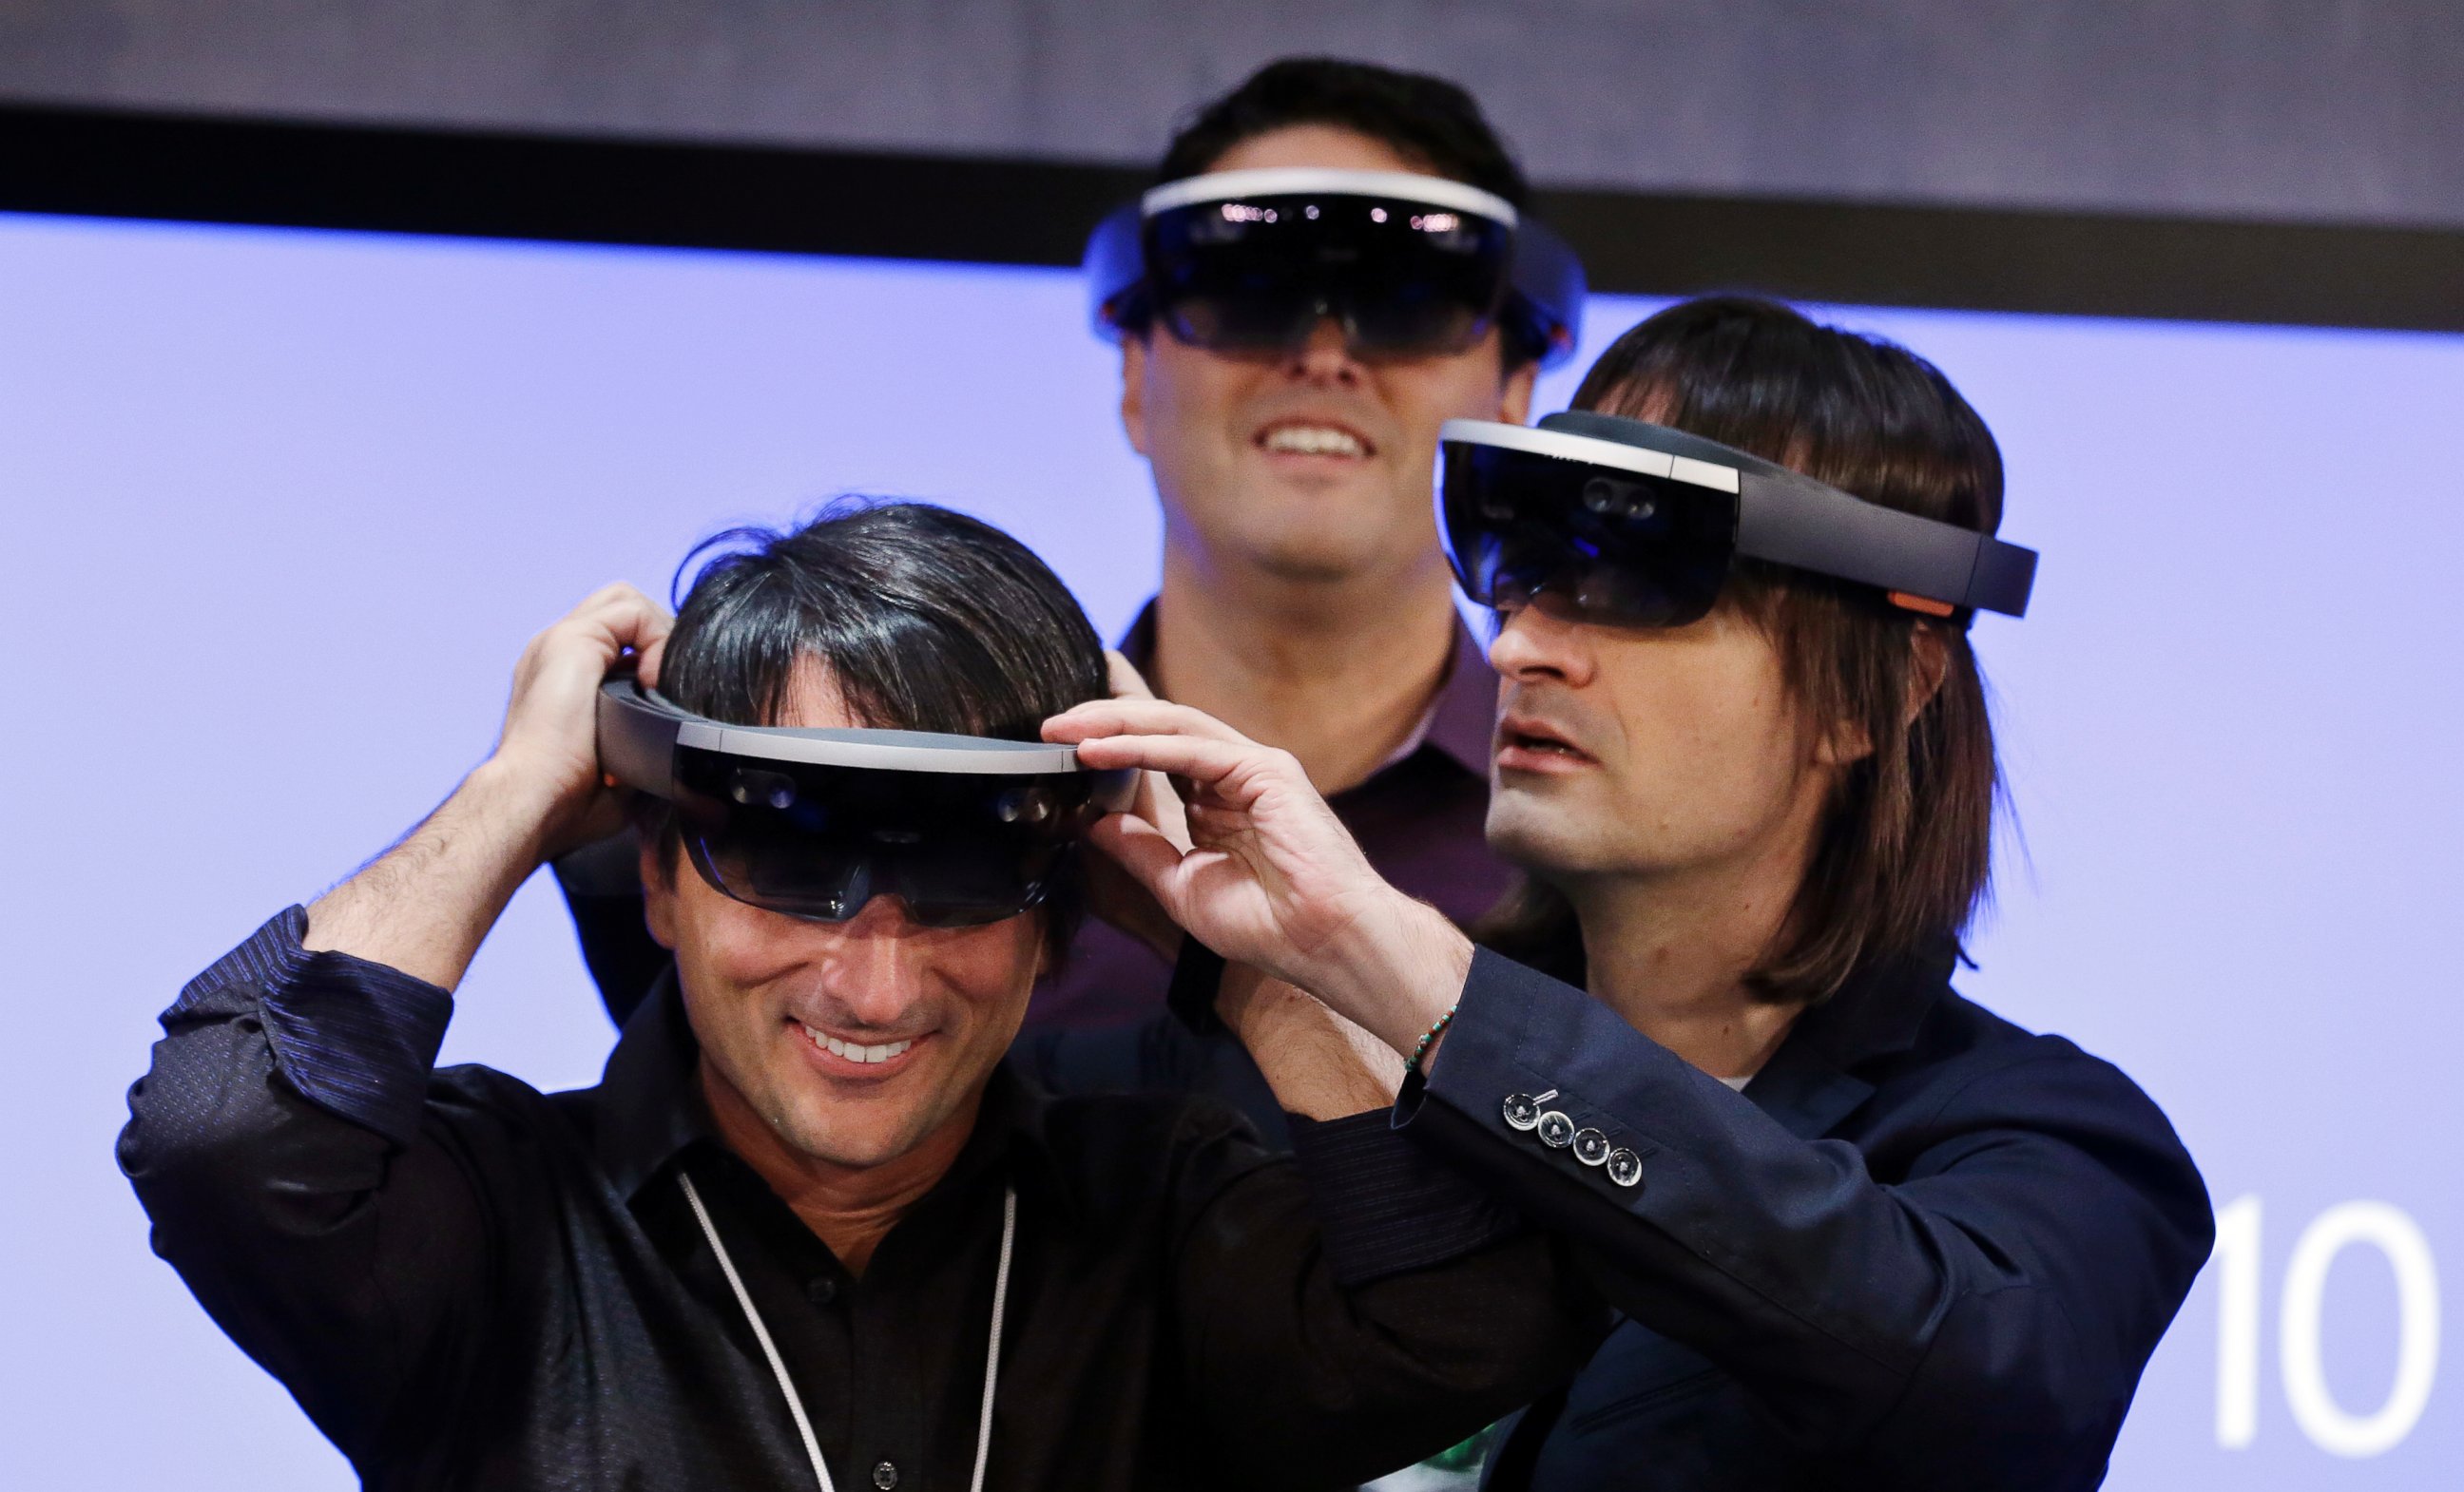 PHOTO: Microsoft's Joe Belfiore smiles as he tries on a "Hololens" device following an event demonstrating new features of Windows 10 at the company's headquarters on Jan. 21, 2015, in Redmond, Wash.